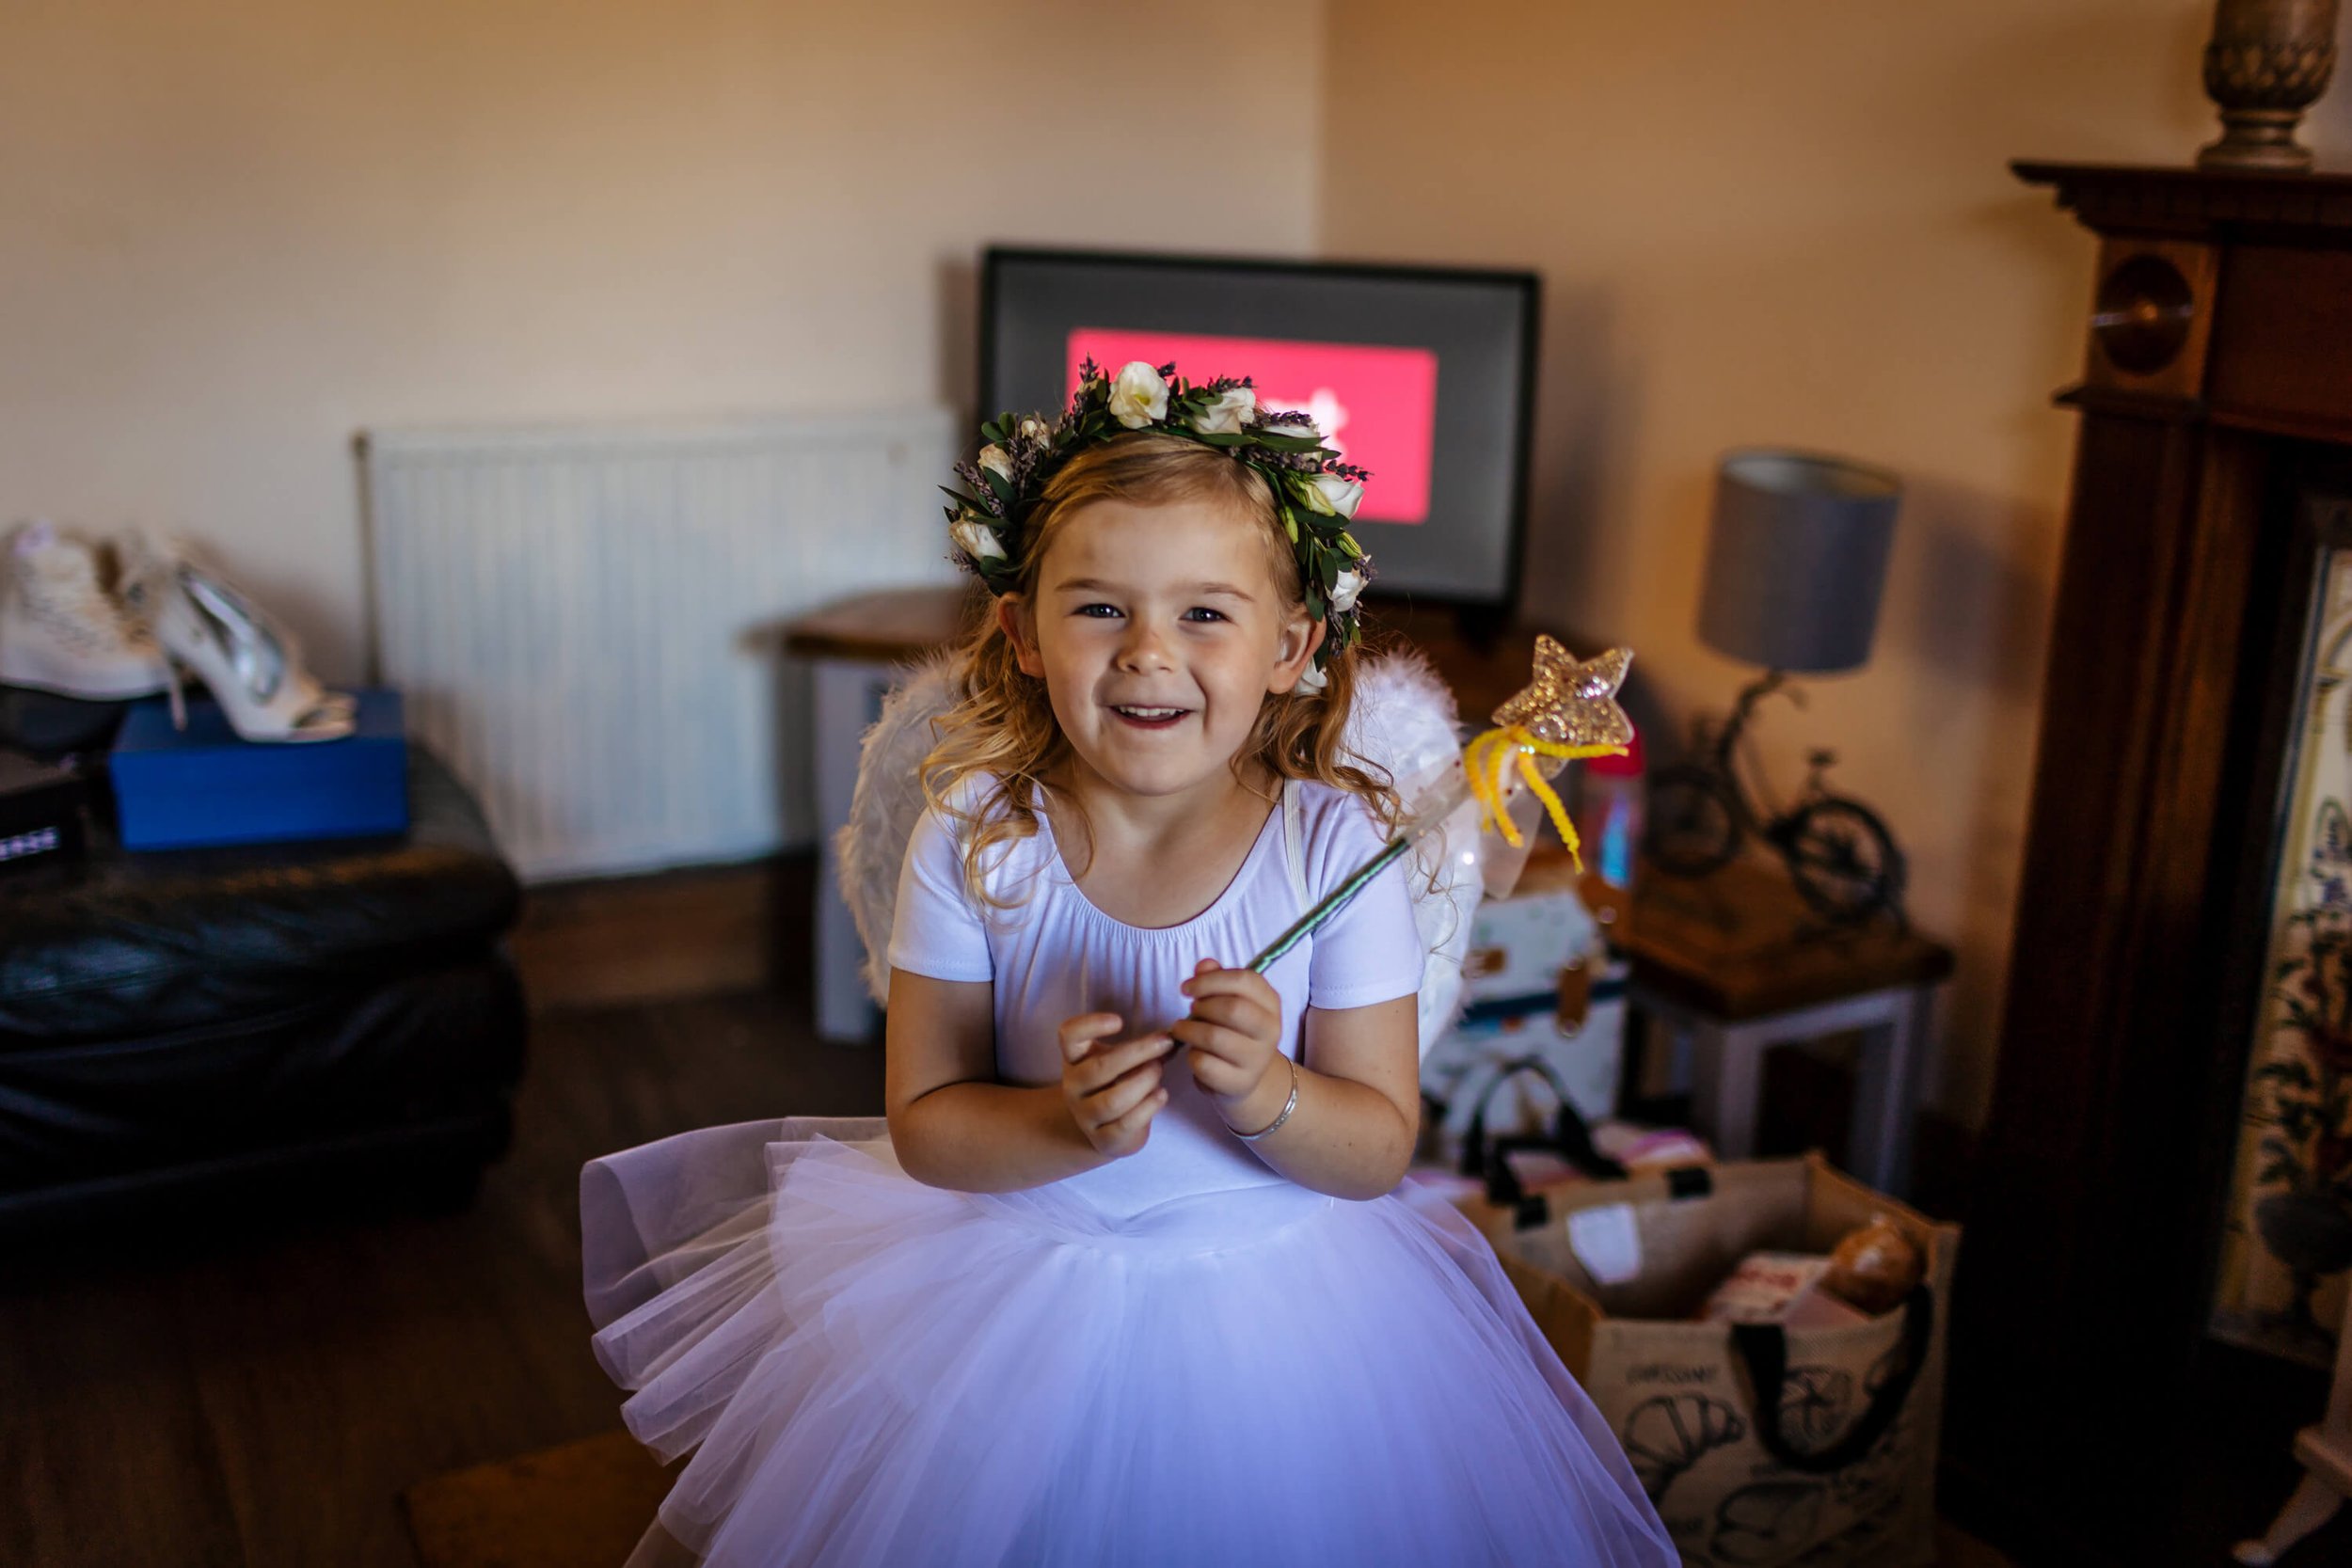 Bride's daughter ready for the wedding with her wand